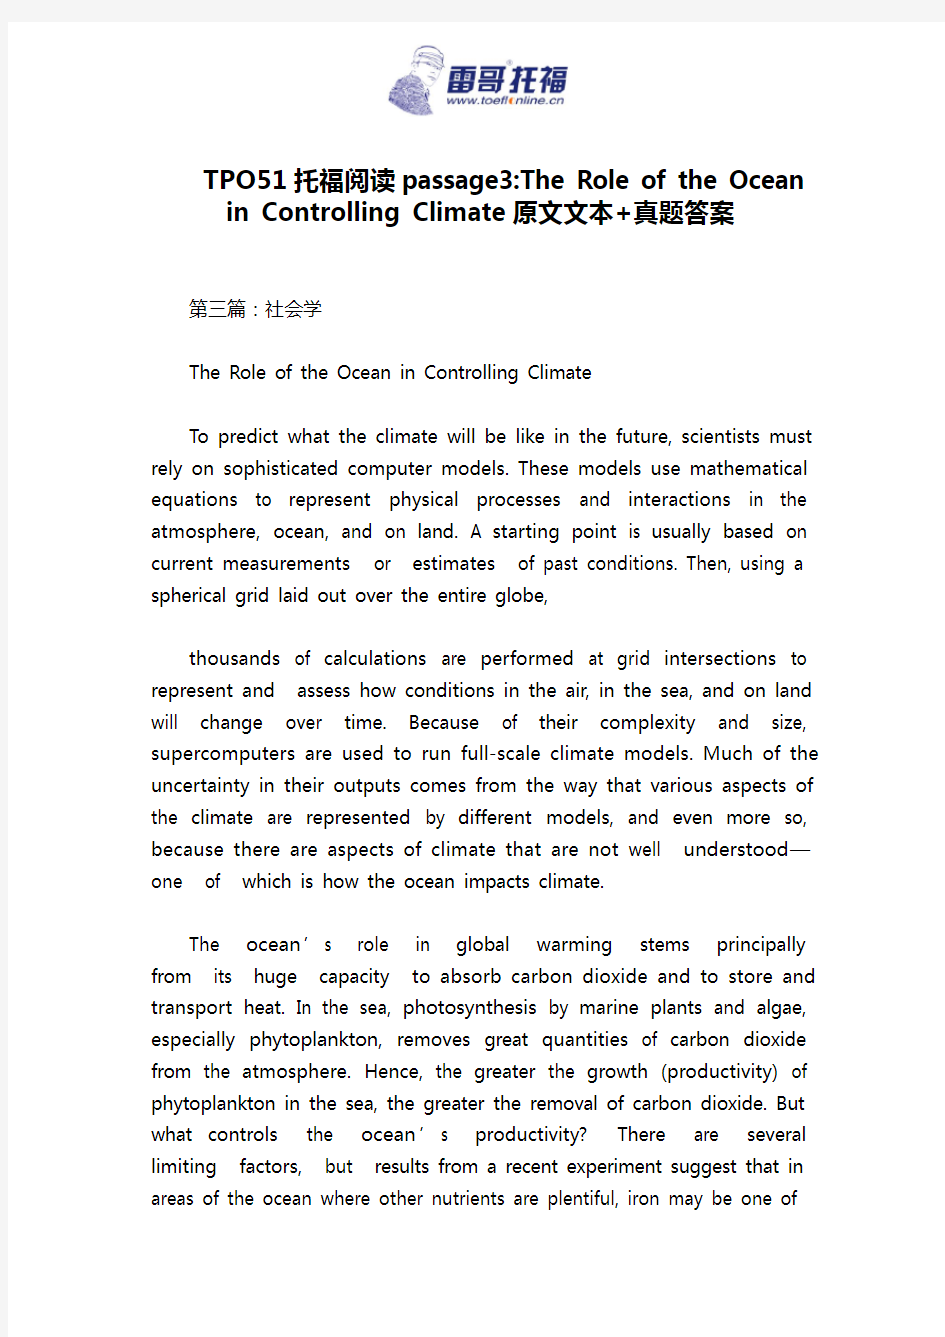 TPO51托福阅读passage3：The Role of the Ocean in Controlling Climate原文文本+真题答案